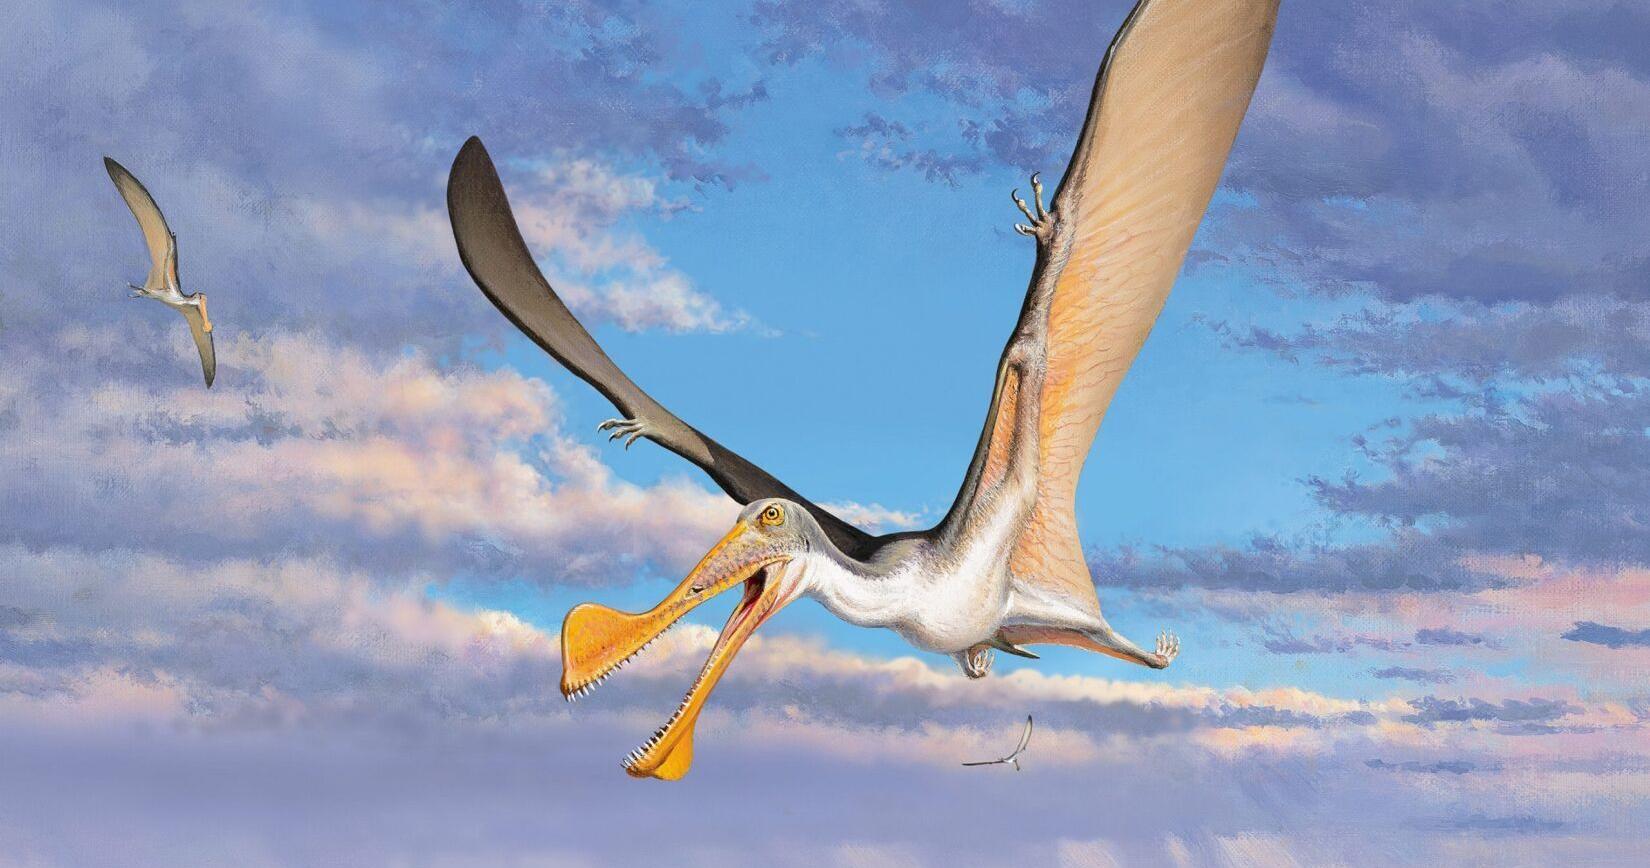 Study sheds light on winged reptile that soared skies 100 million years ago